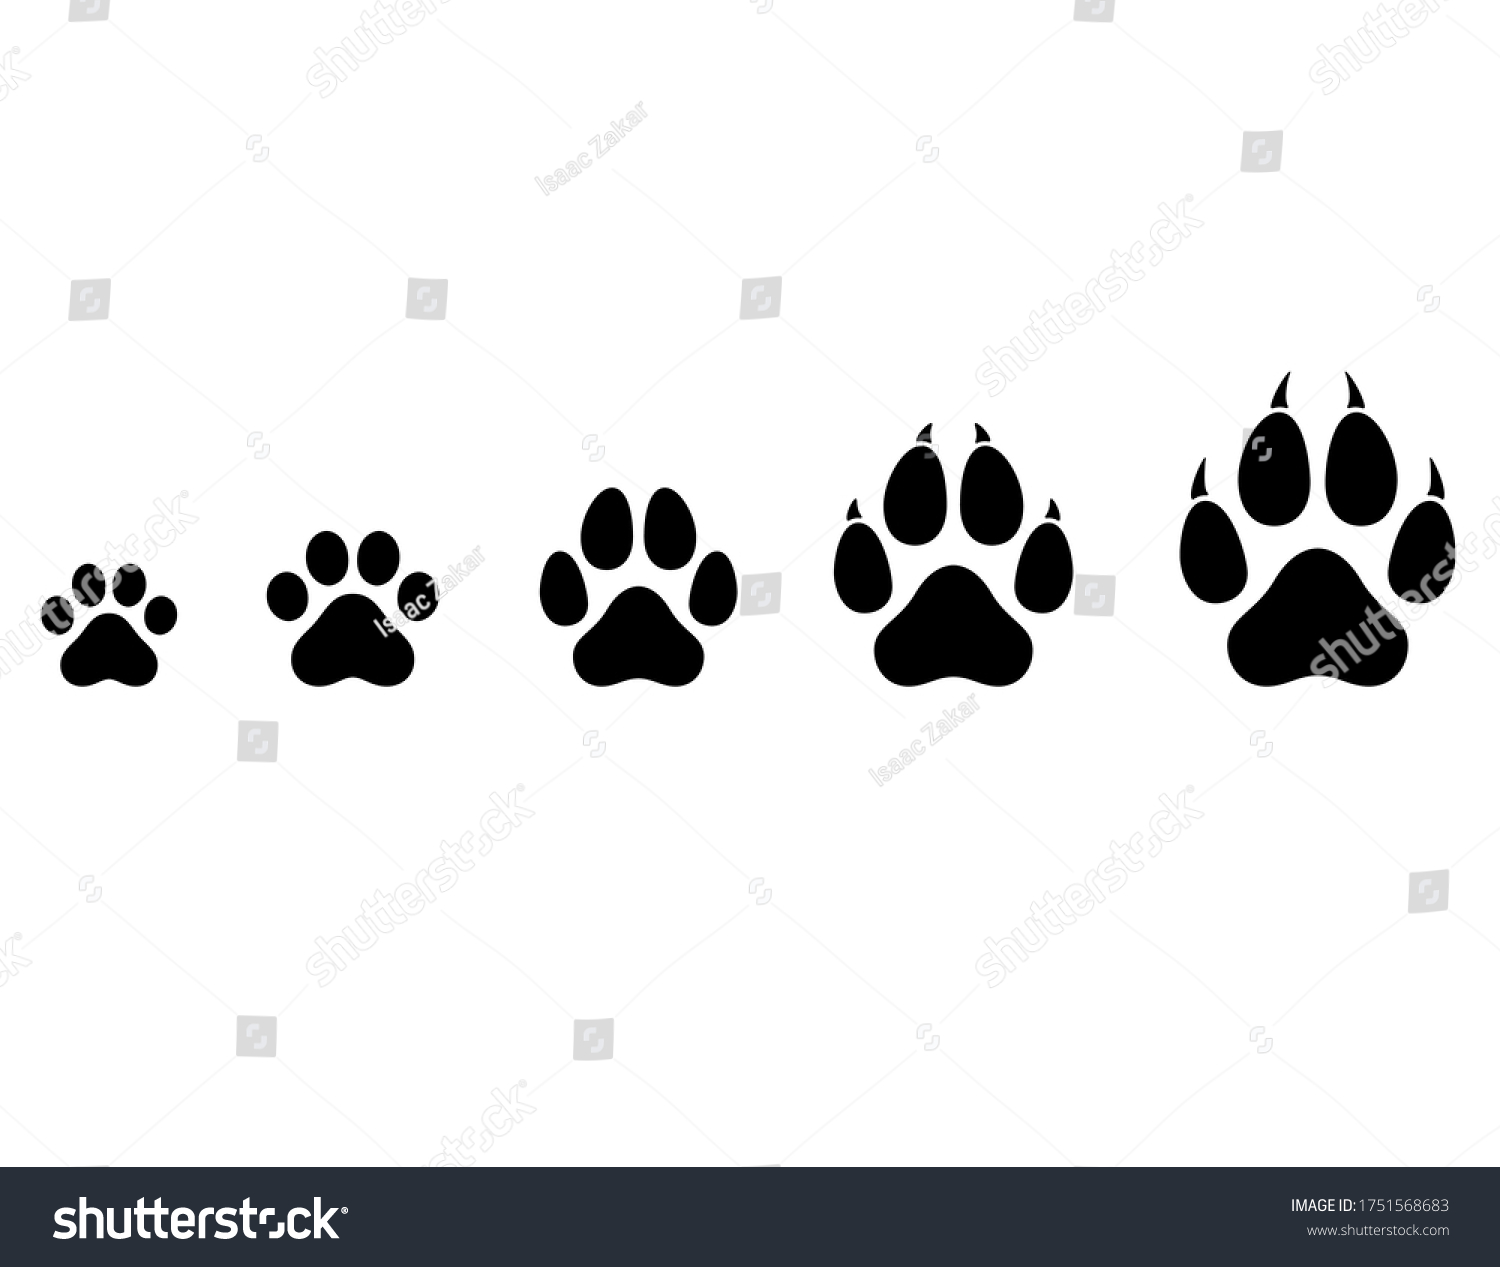 SVG of Vector cat and dog paws of different sizes svg